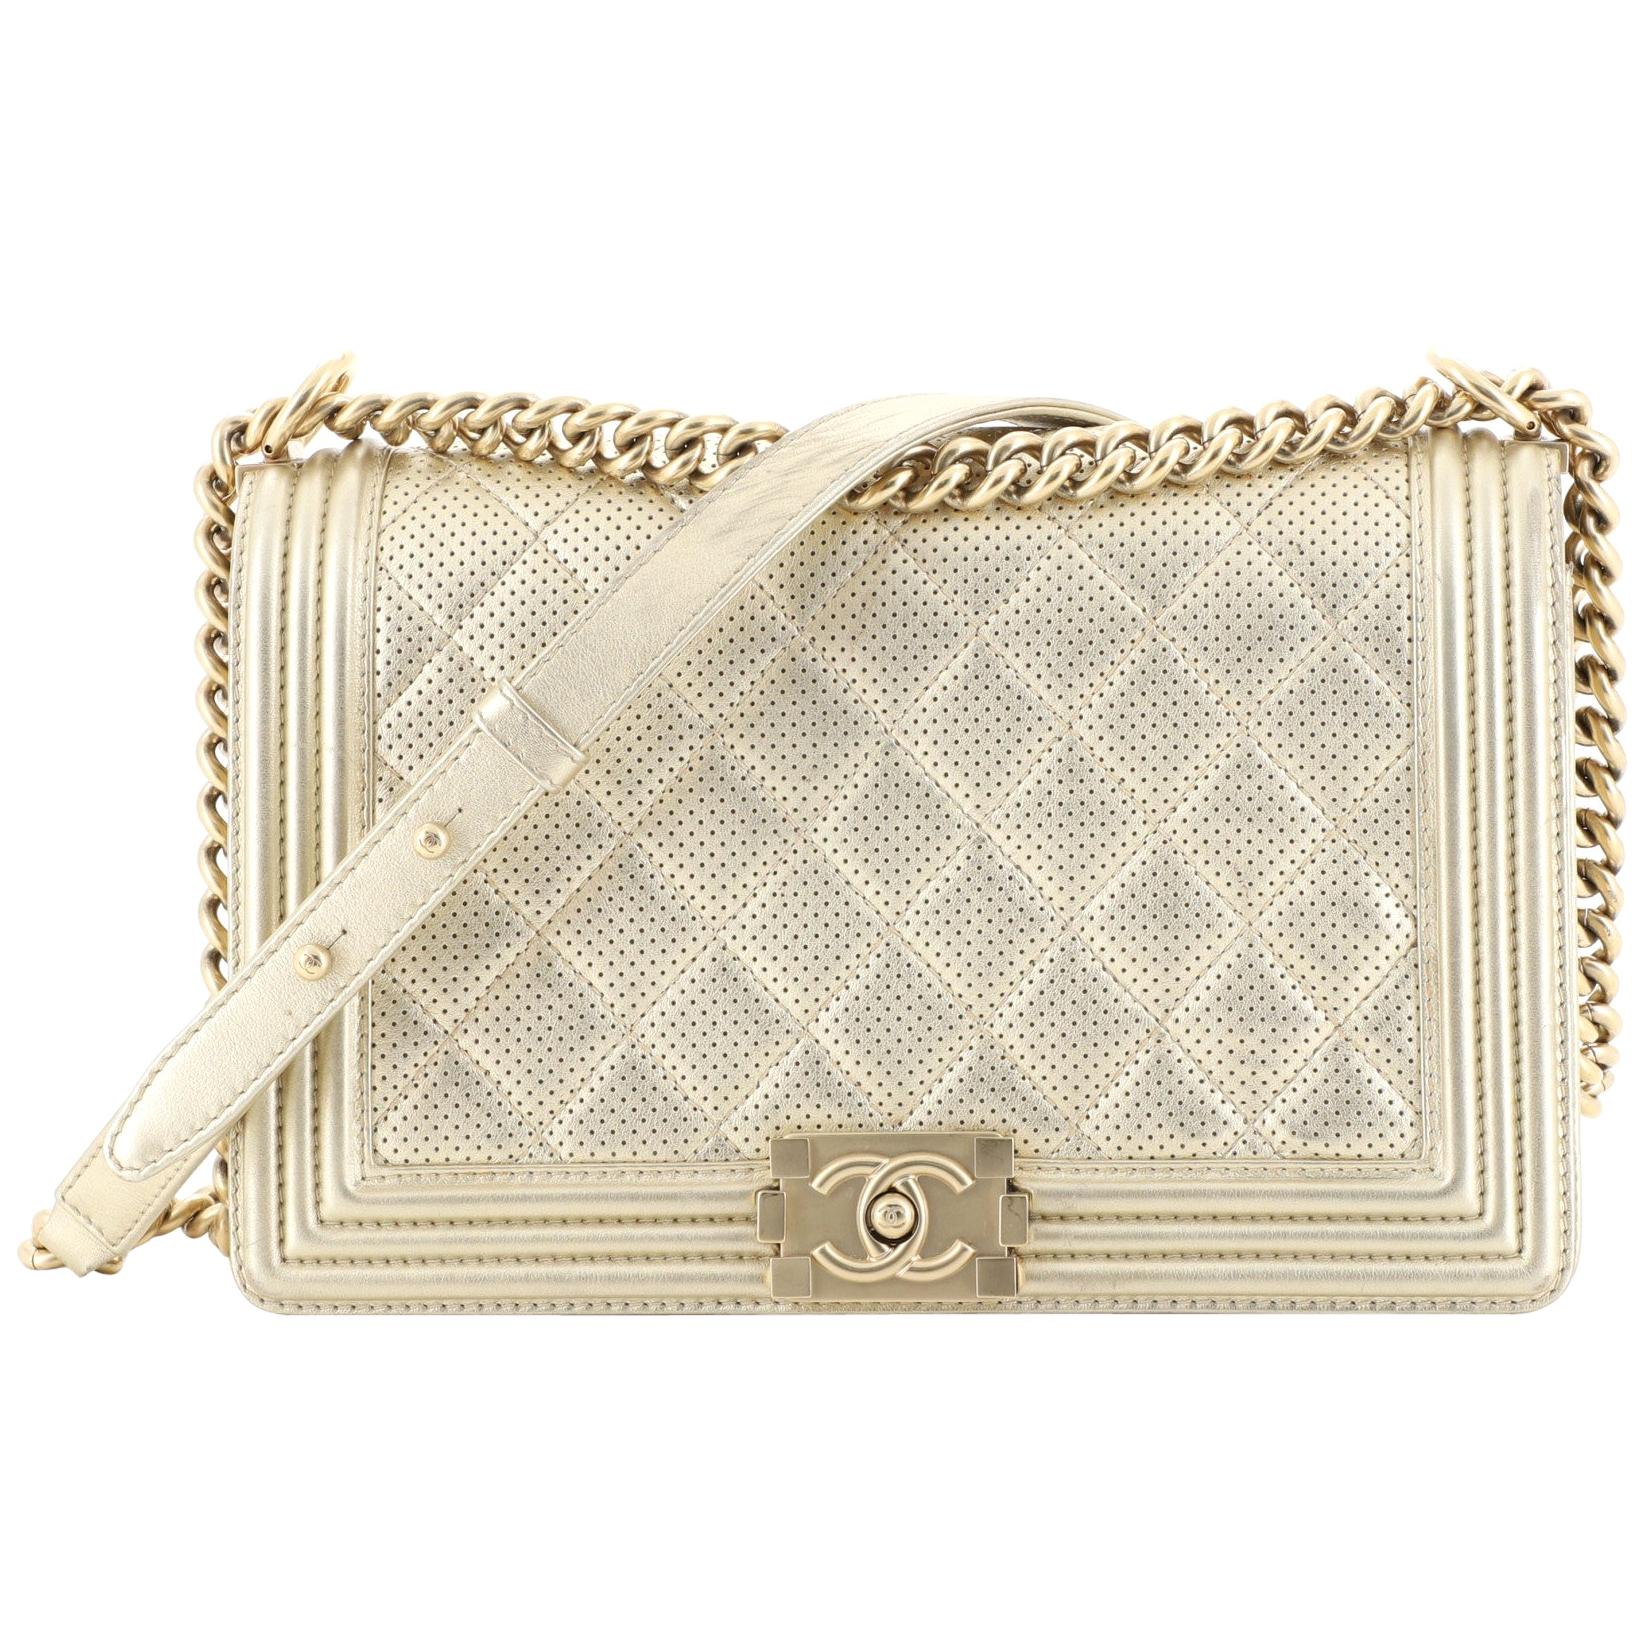 Chanel Boy Flap Bag Quilted Perforated Lambskin New Medium